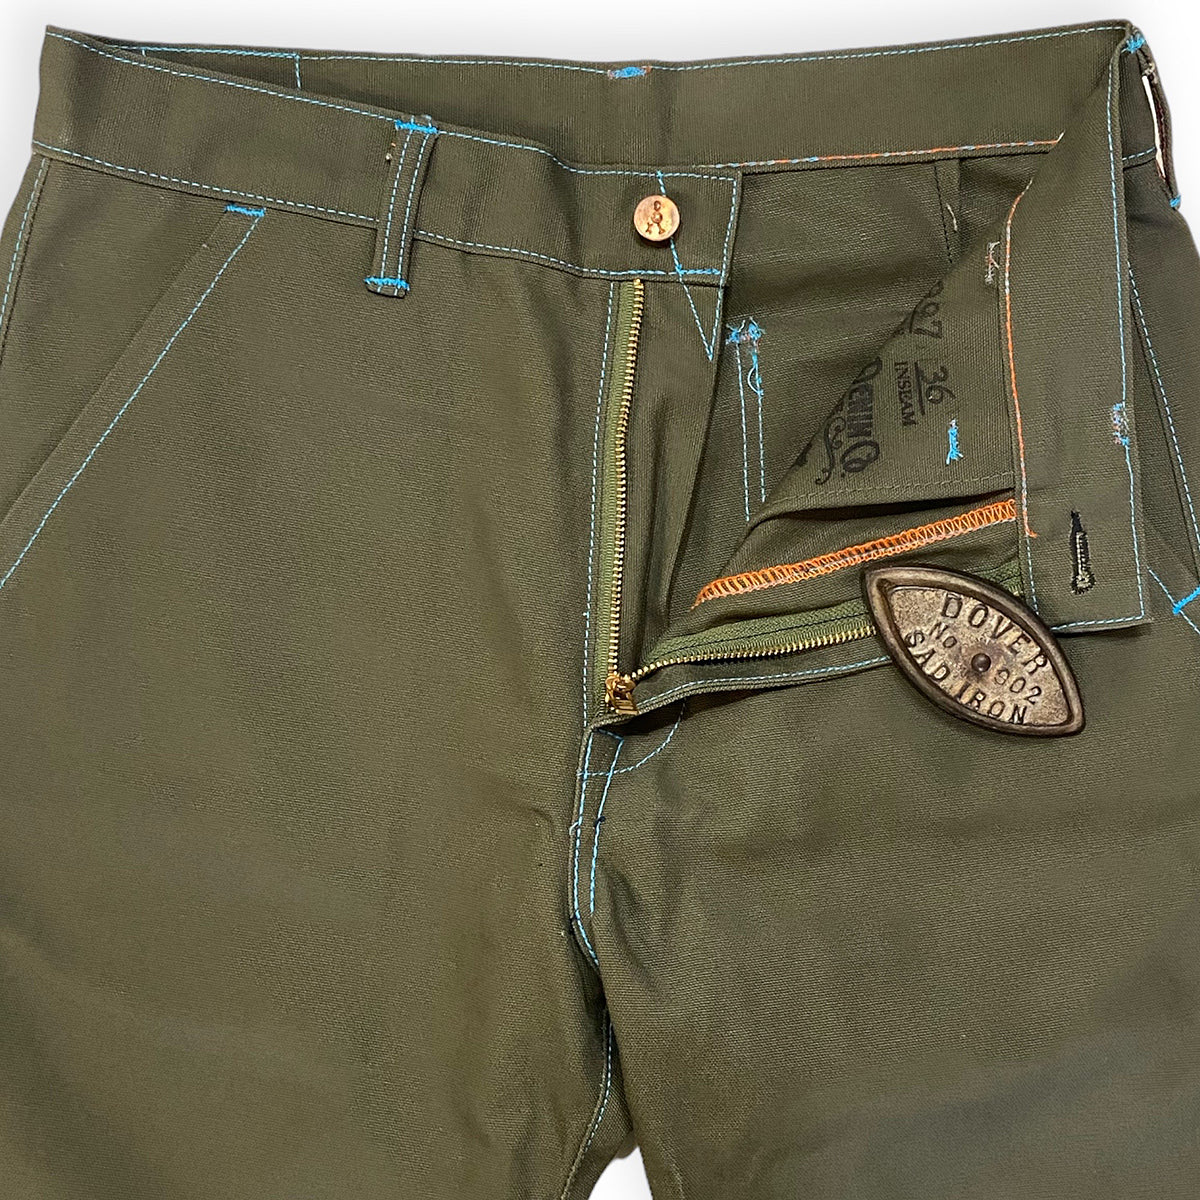 OPSTK 32W 36L 997 Miner Fit  - #133 12oz SeaGrass Duck Canvas FIELDHAND Chino